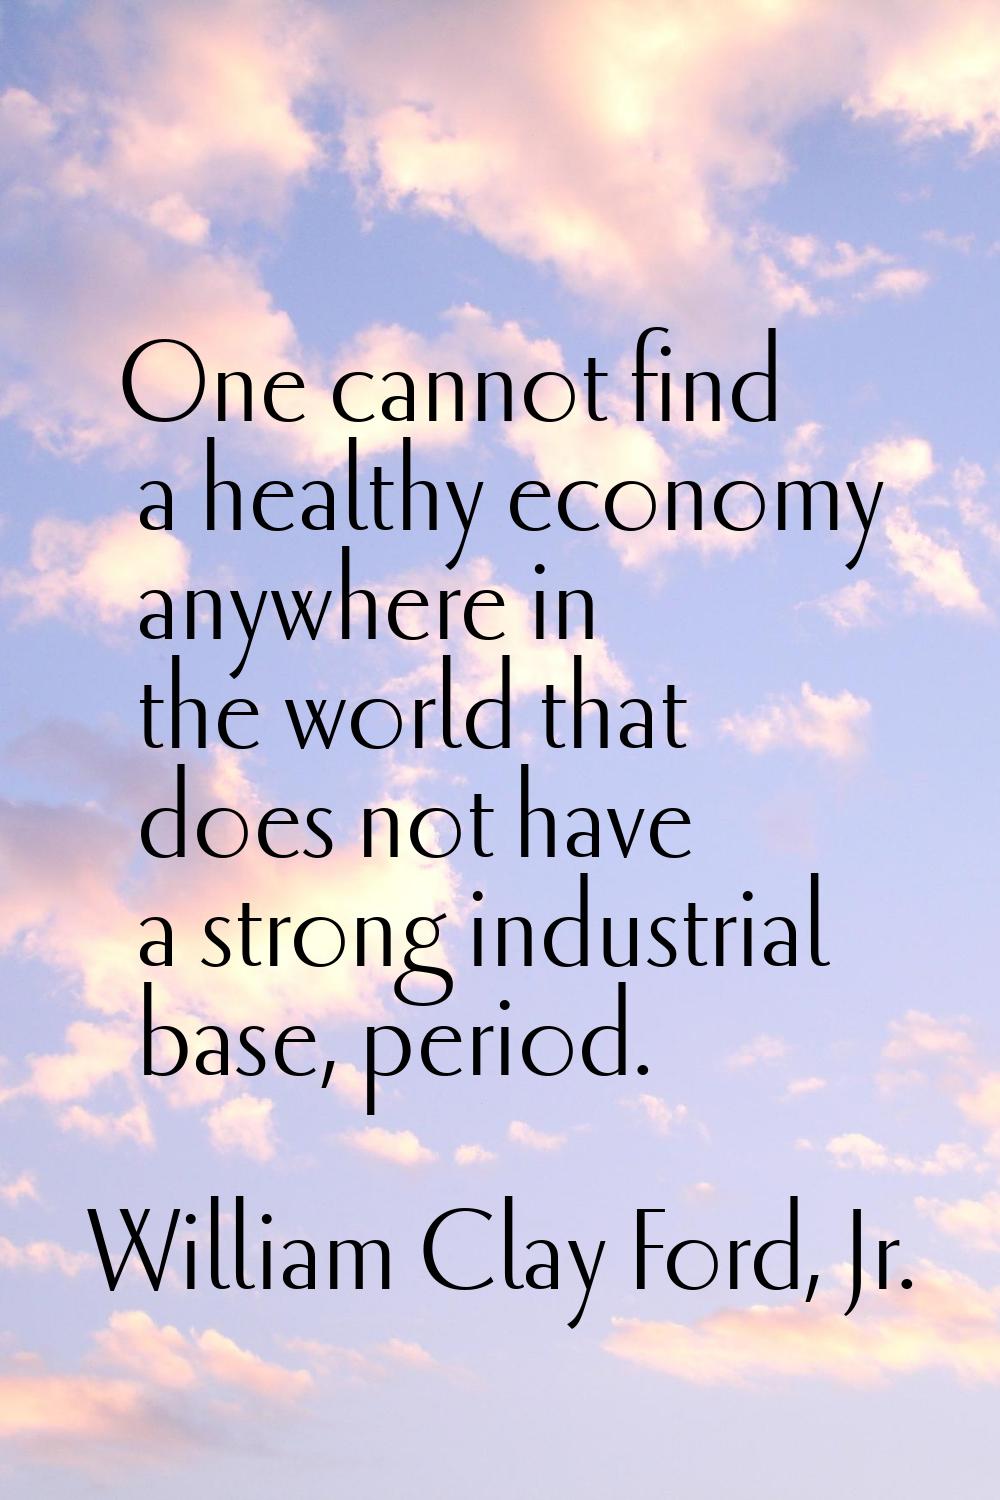 One cannot find a healthy economy anywhere in the world that does not have a strong industrial base